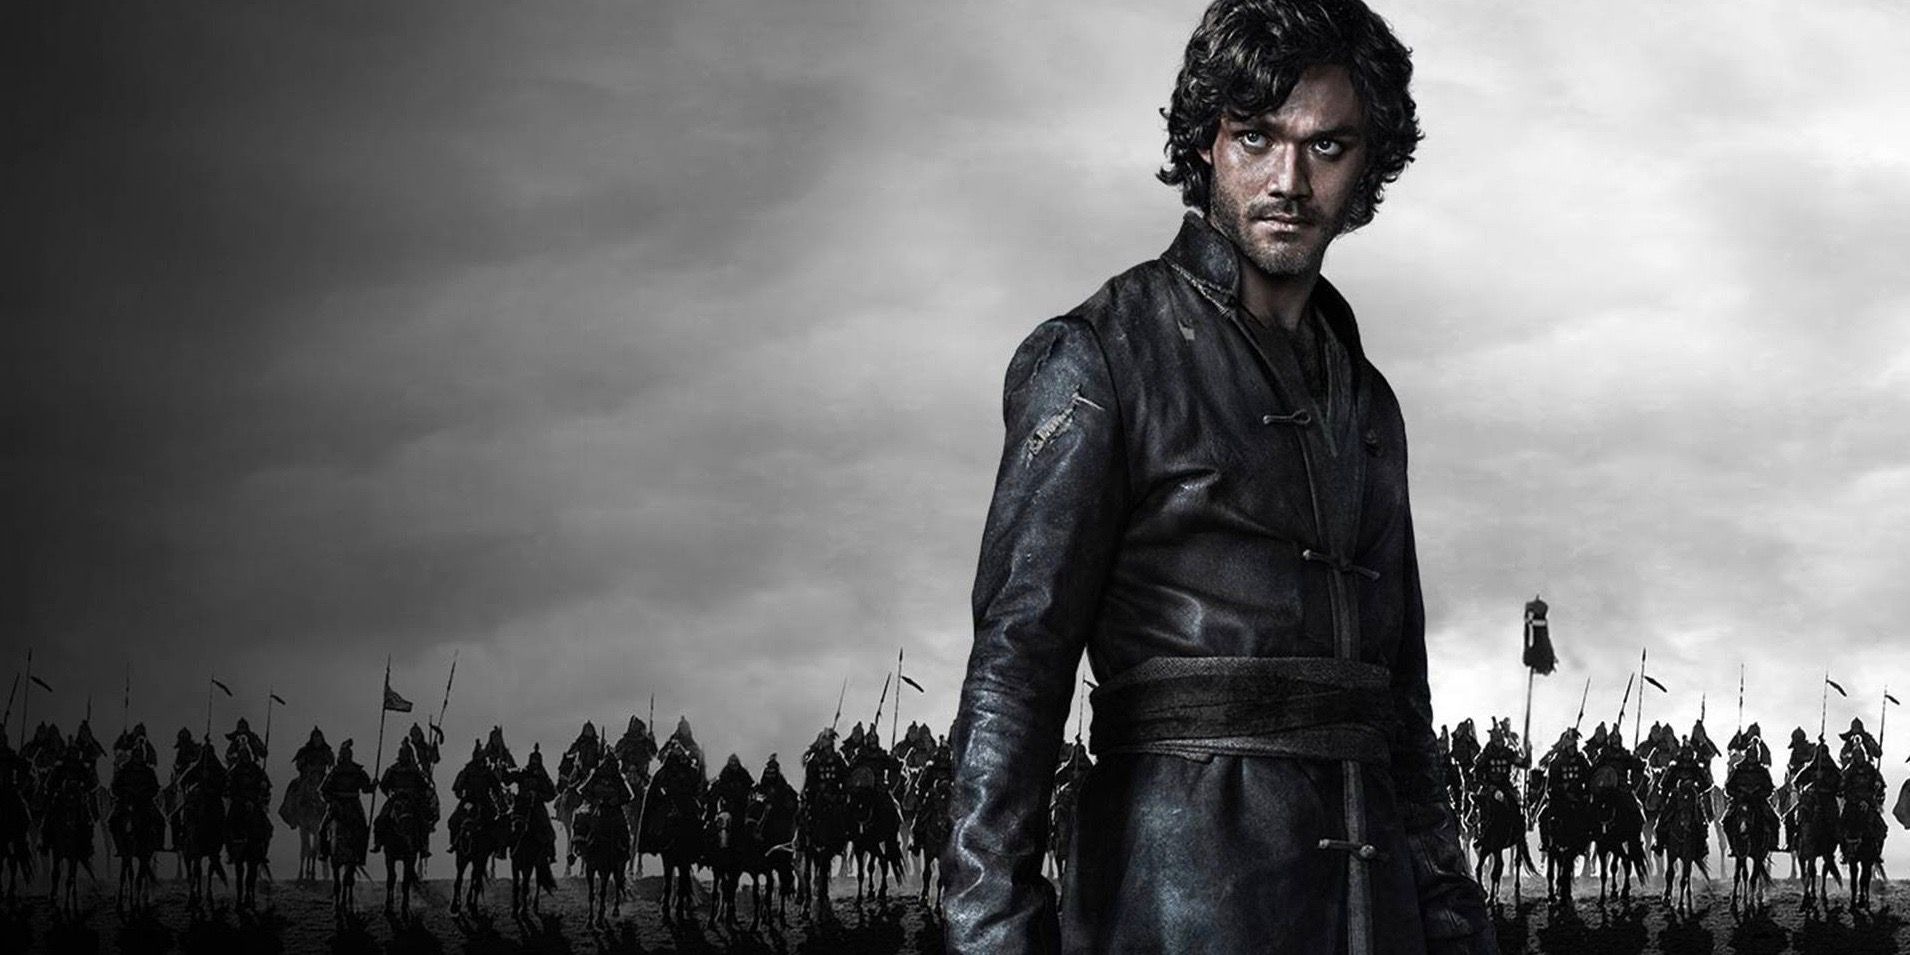 Marco Polo in front of an army in a promo image for the eponymous show